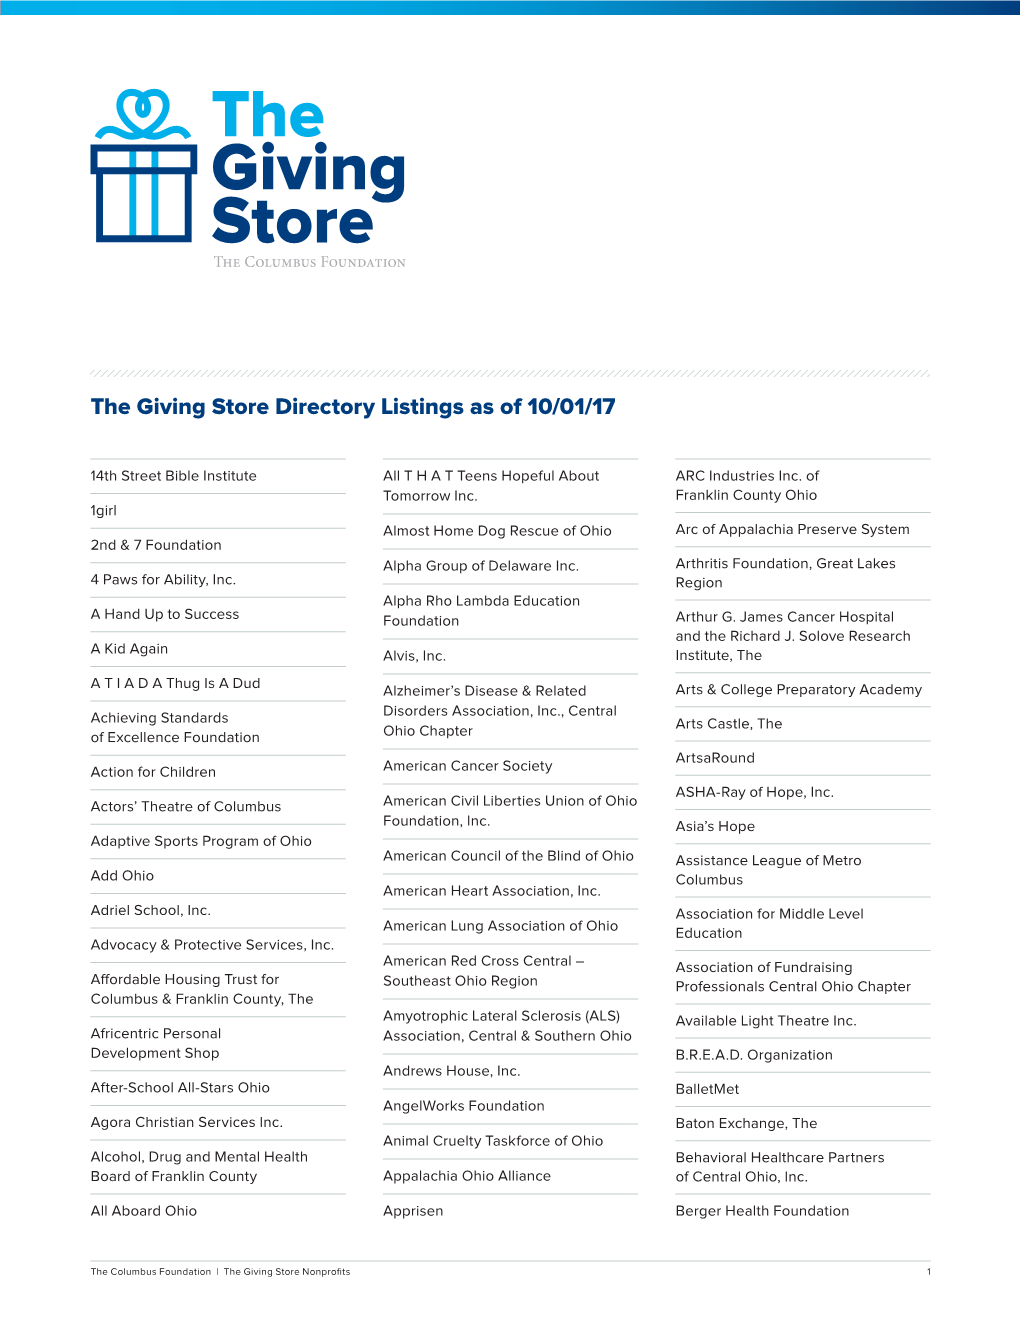 The Giving Store Directory Listings As of 10/01/17